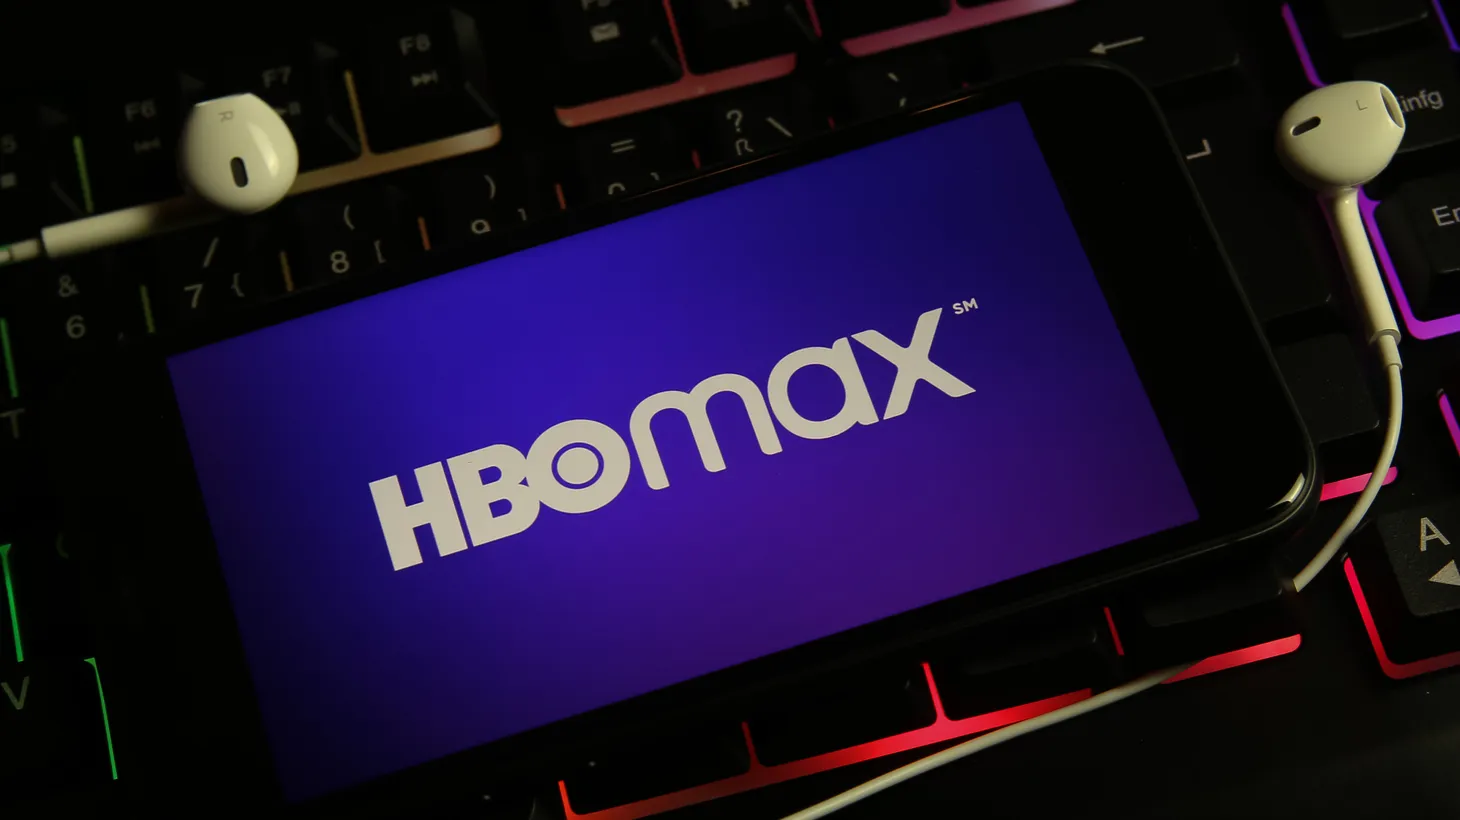 WarnerMedia CEO Jason Kilar recently took a victory lap around HBO and HBO Max’s new subscription numbers. But there are questions that remain about how those numbers will hold heading into the new year.